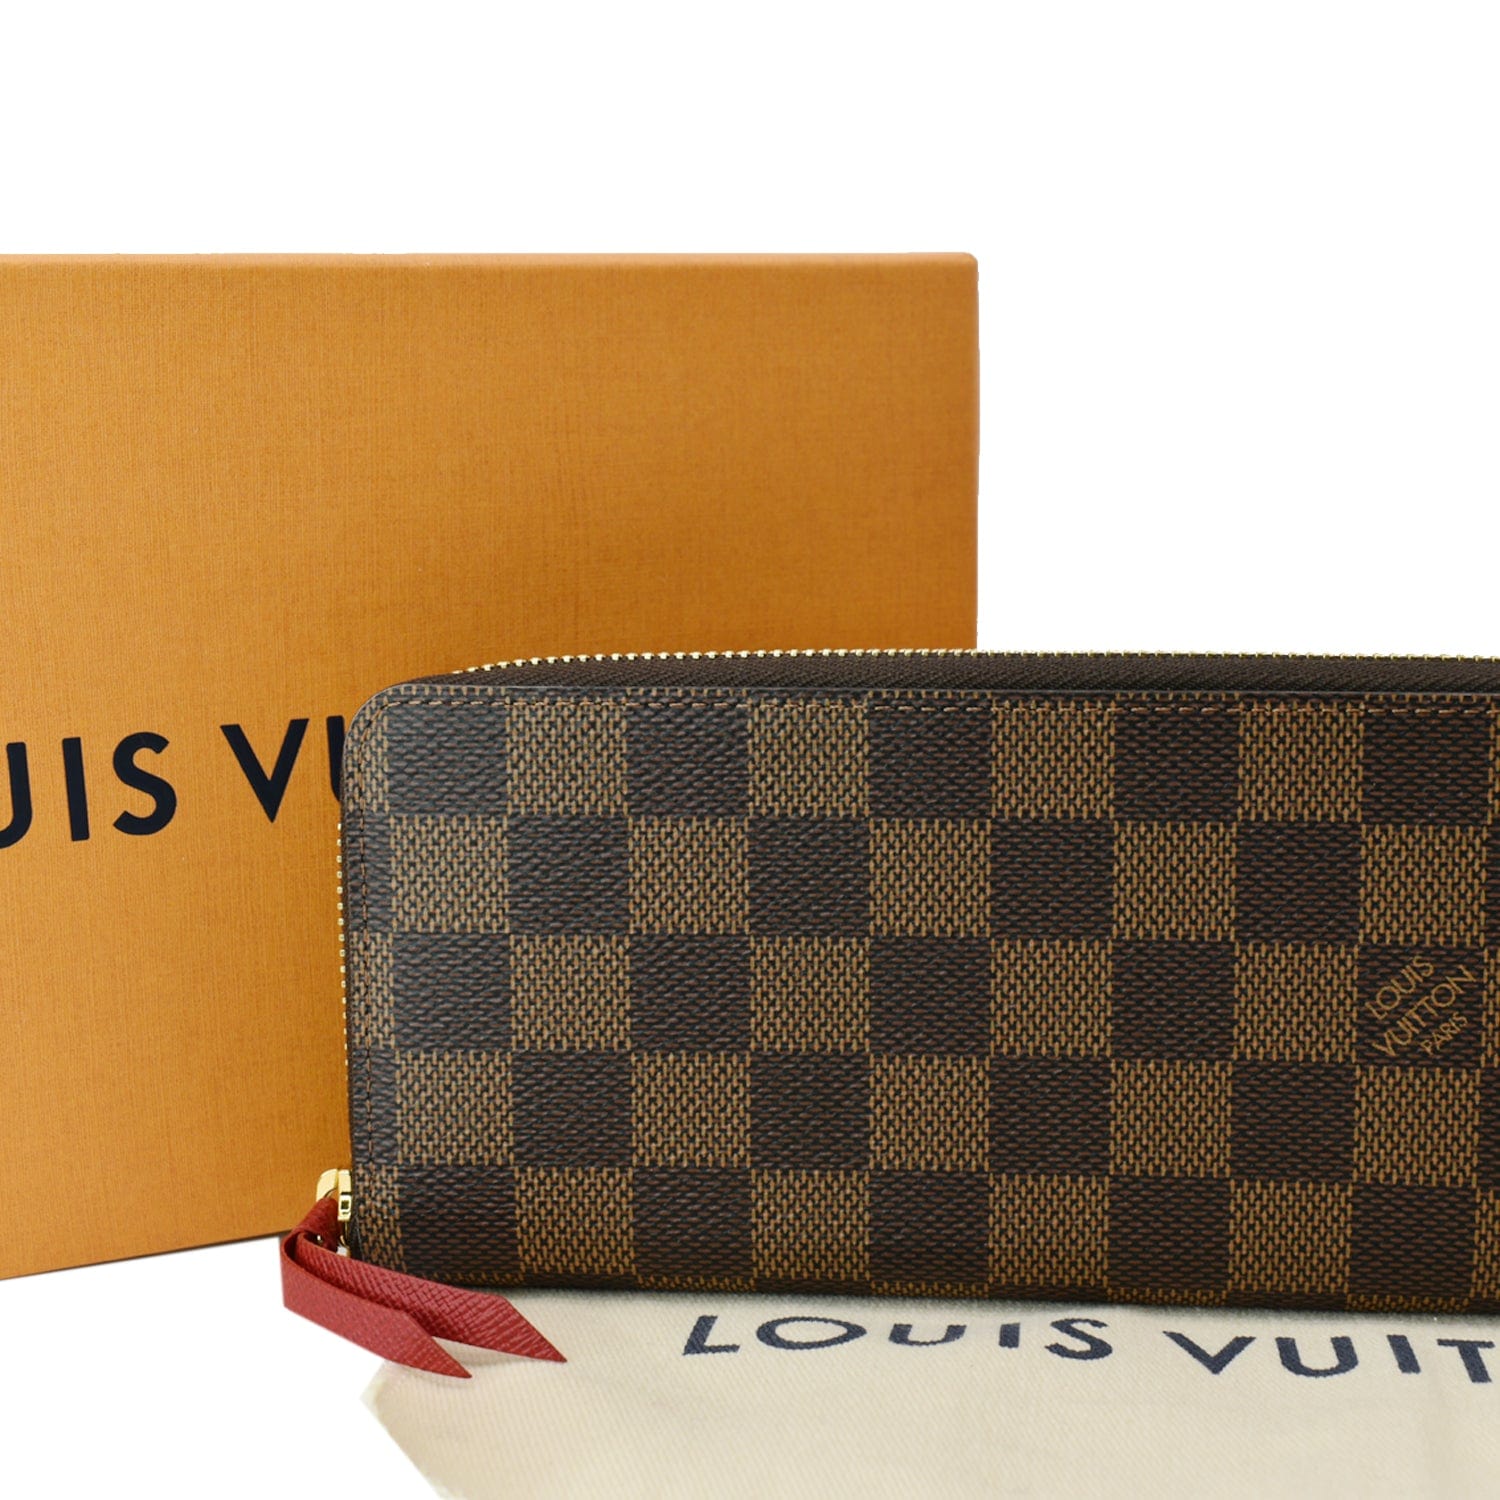 Louis Vuitton Clemence Wallet Monogram Brown/Berry in Coated